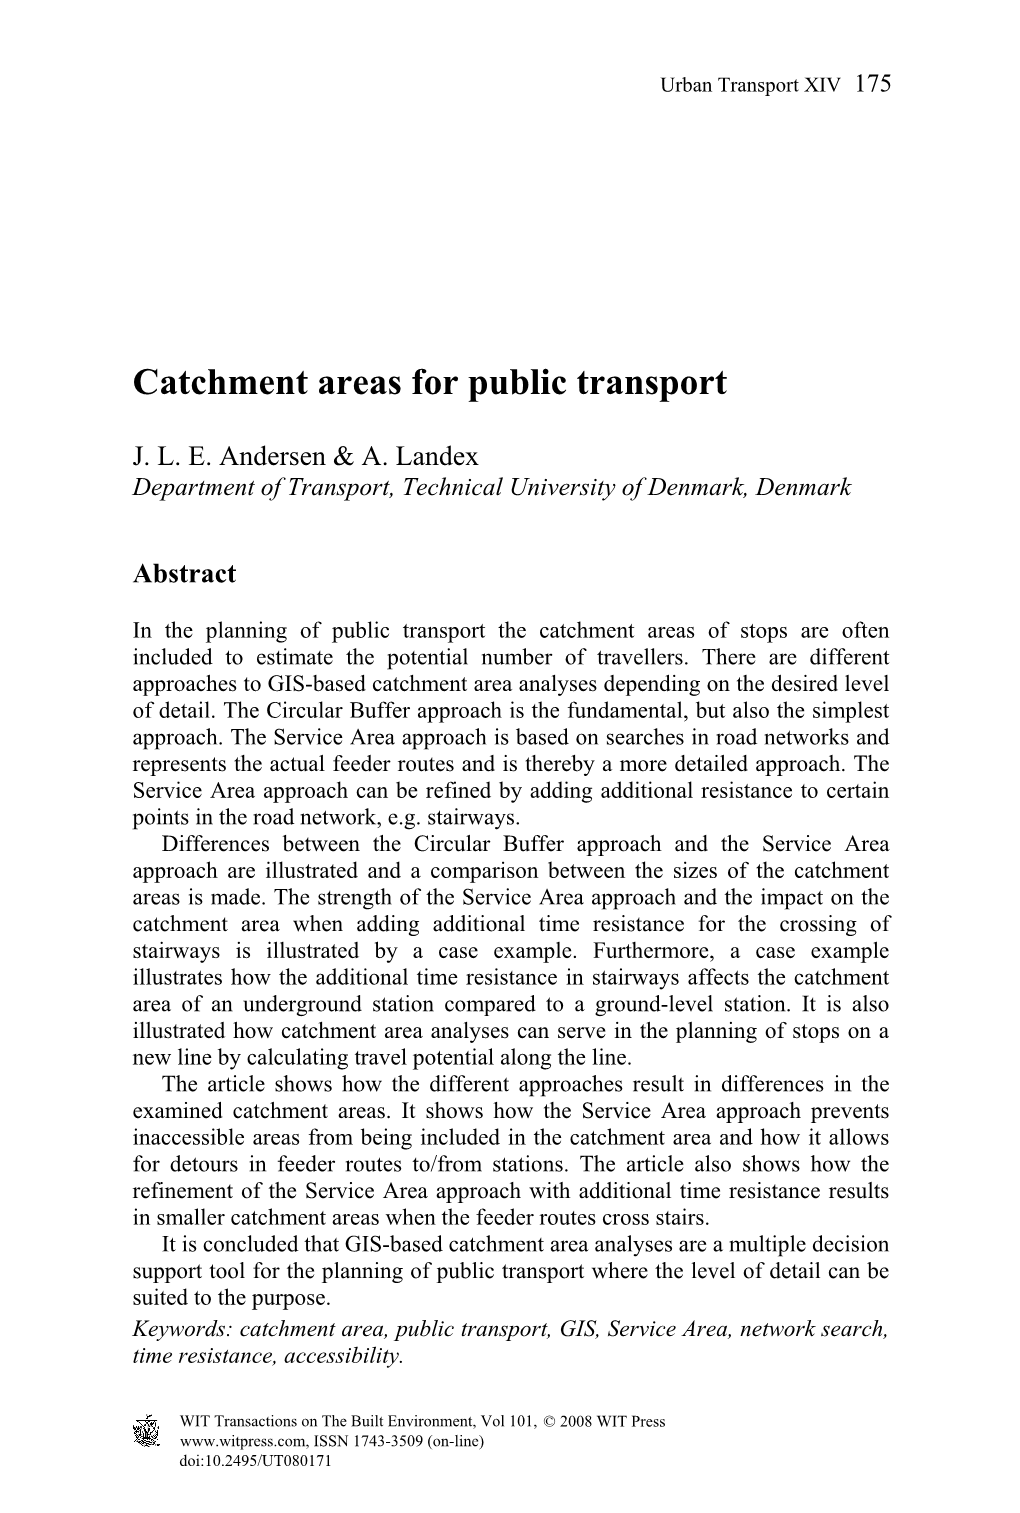 Catchment Areas for Public Transport